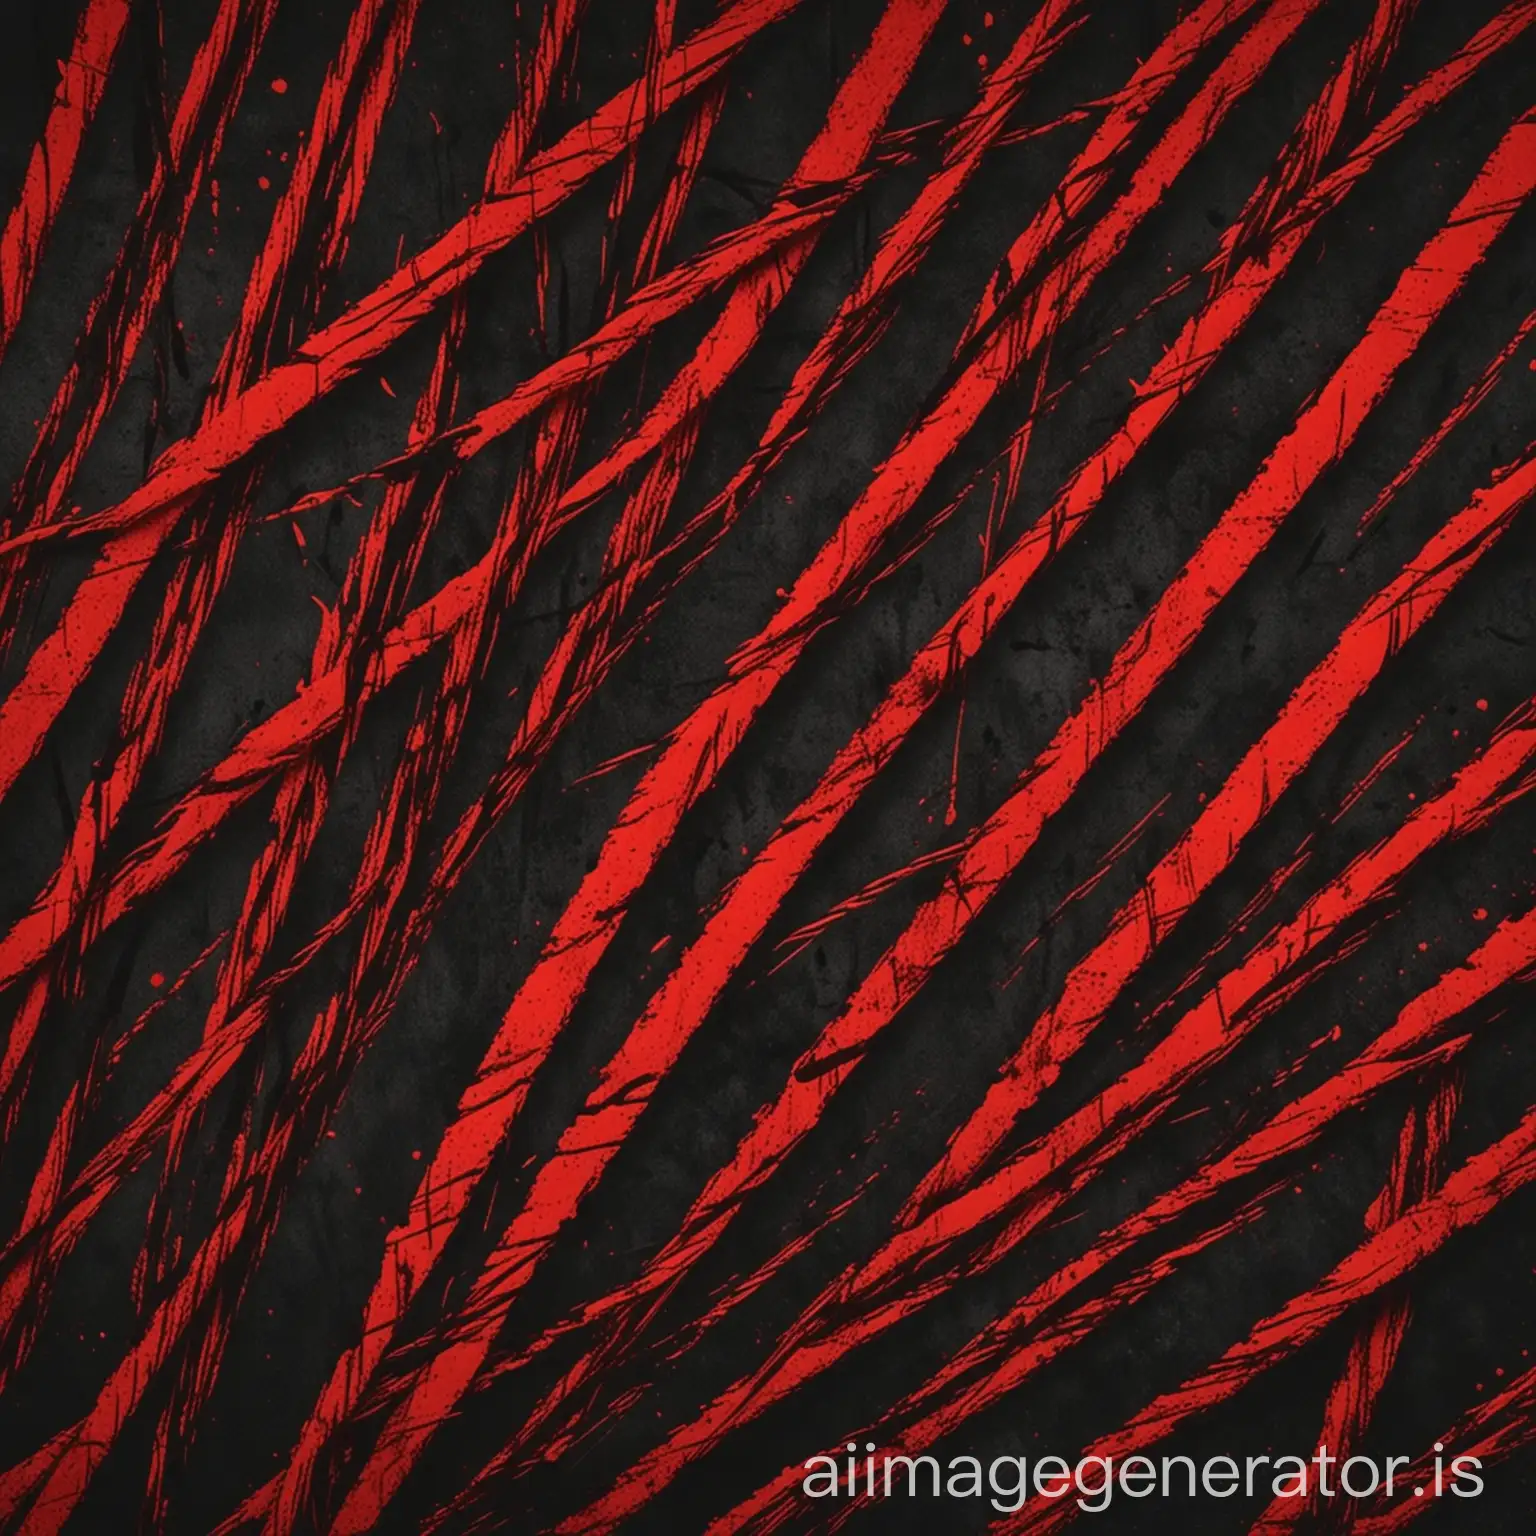 Abstract-Black-and-Red-Striped-Poster-Background-with-Cool-Artistic-Lines